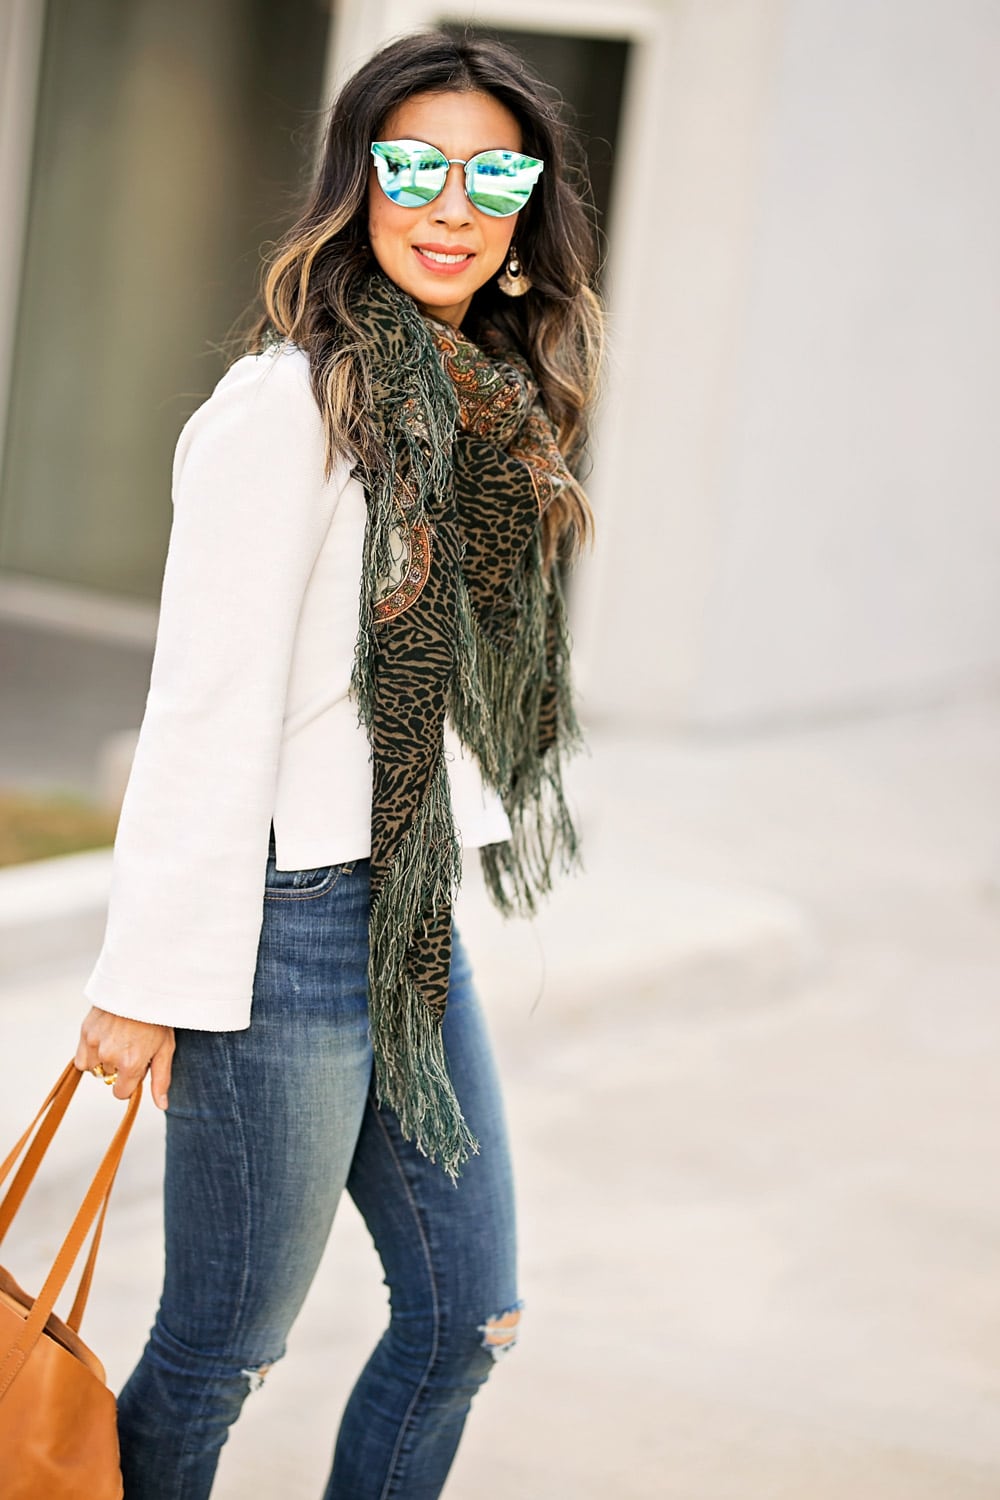 ABLE bell sleeve pullover high rise jeans chelsea boot abera crossbody tote green fringe scarf